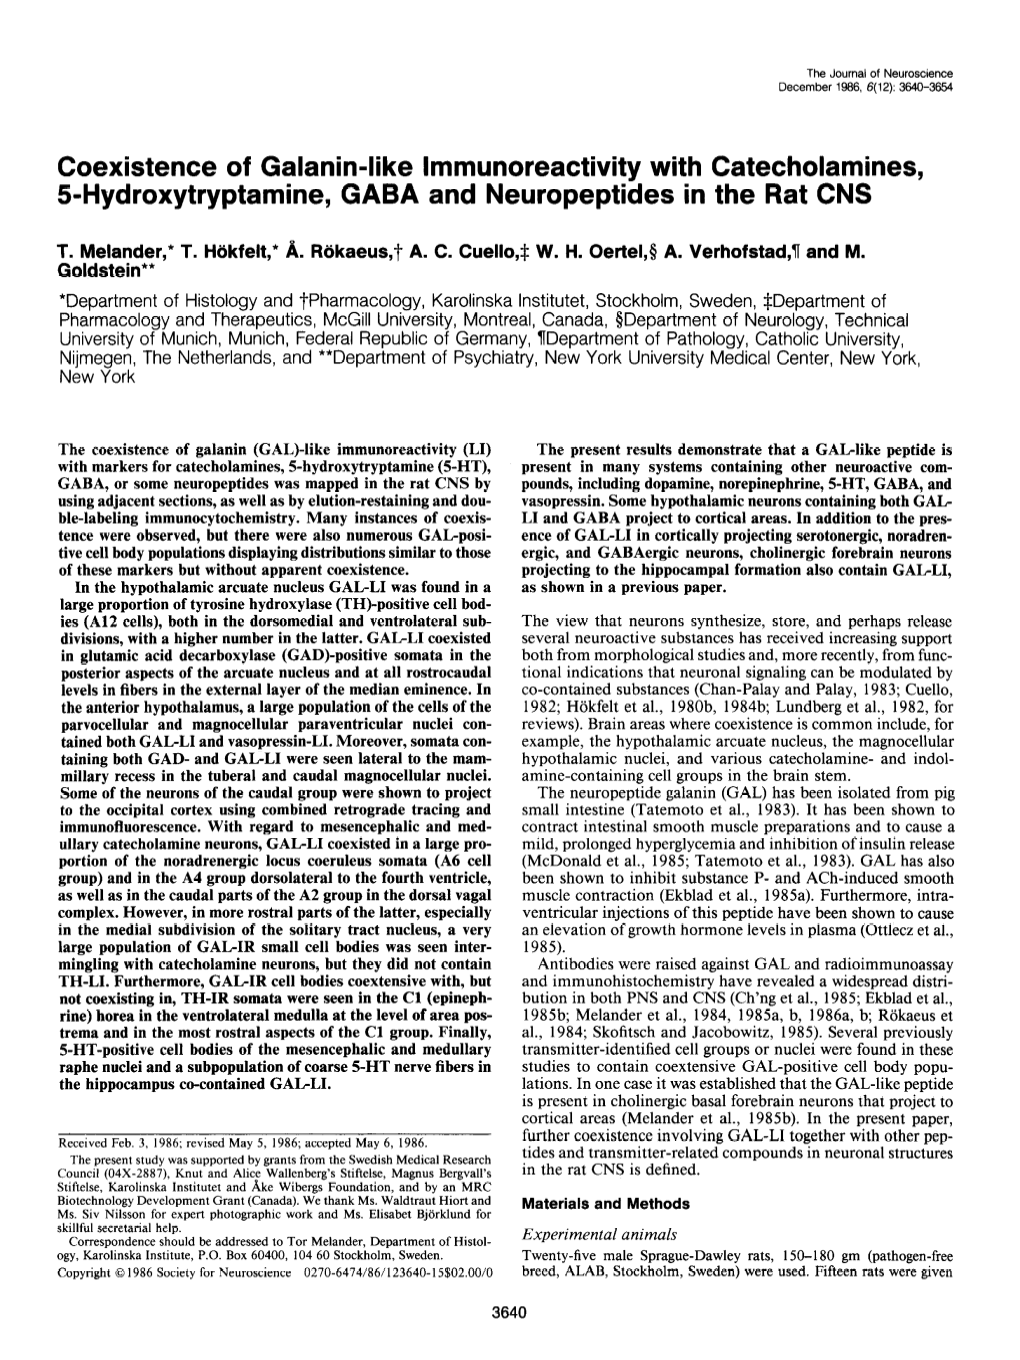 Coexistence of Galanin-Like Lmmunoreactivity with Catecholamines, 5=Hydroxytryptamine, GABA and Neuropeptides in the Rat CNS